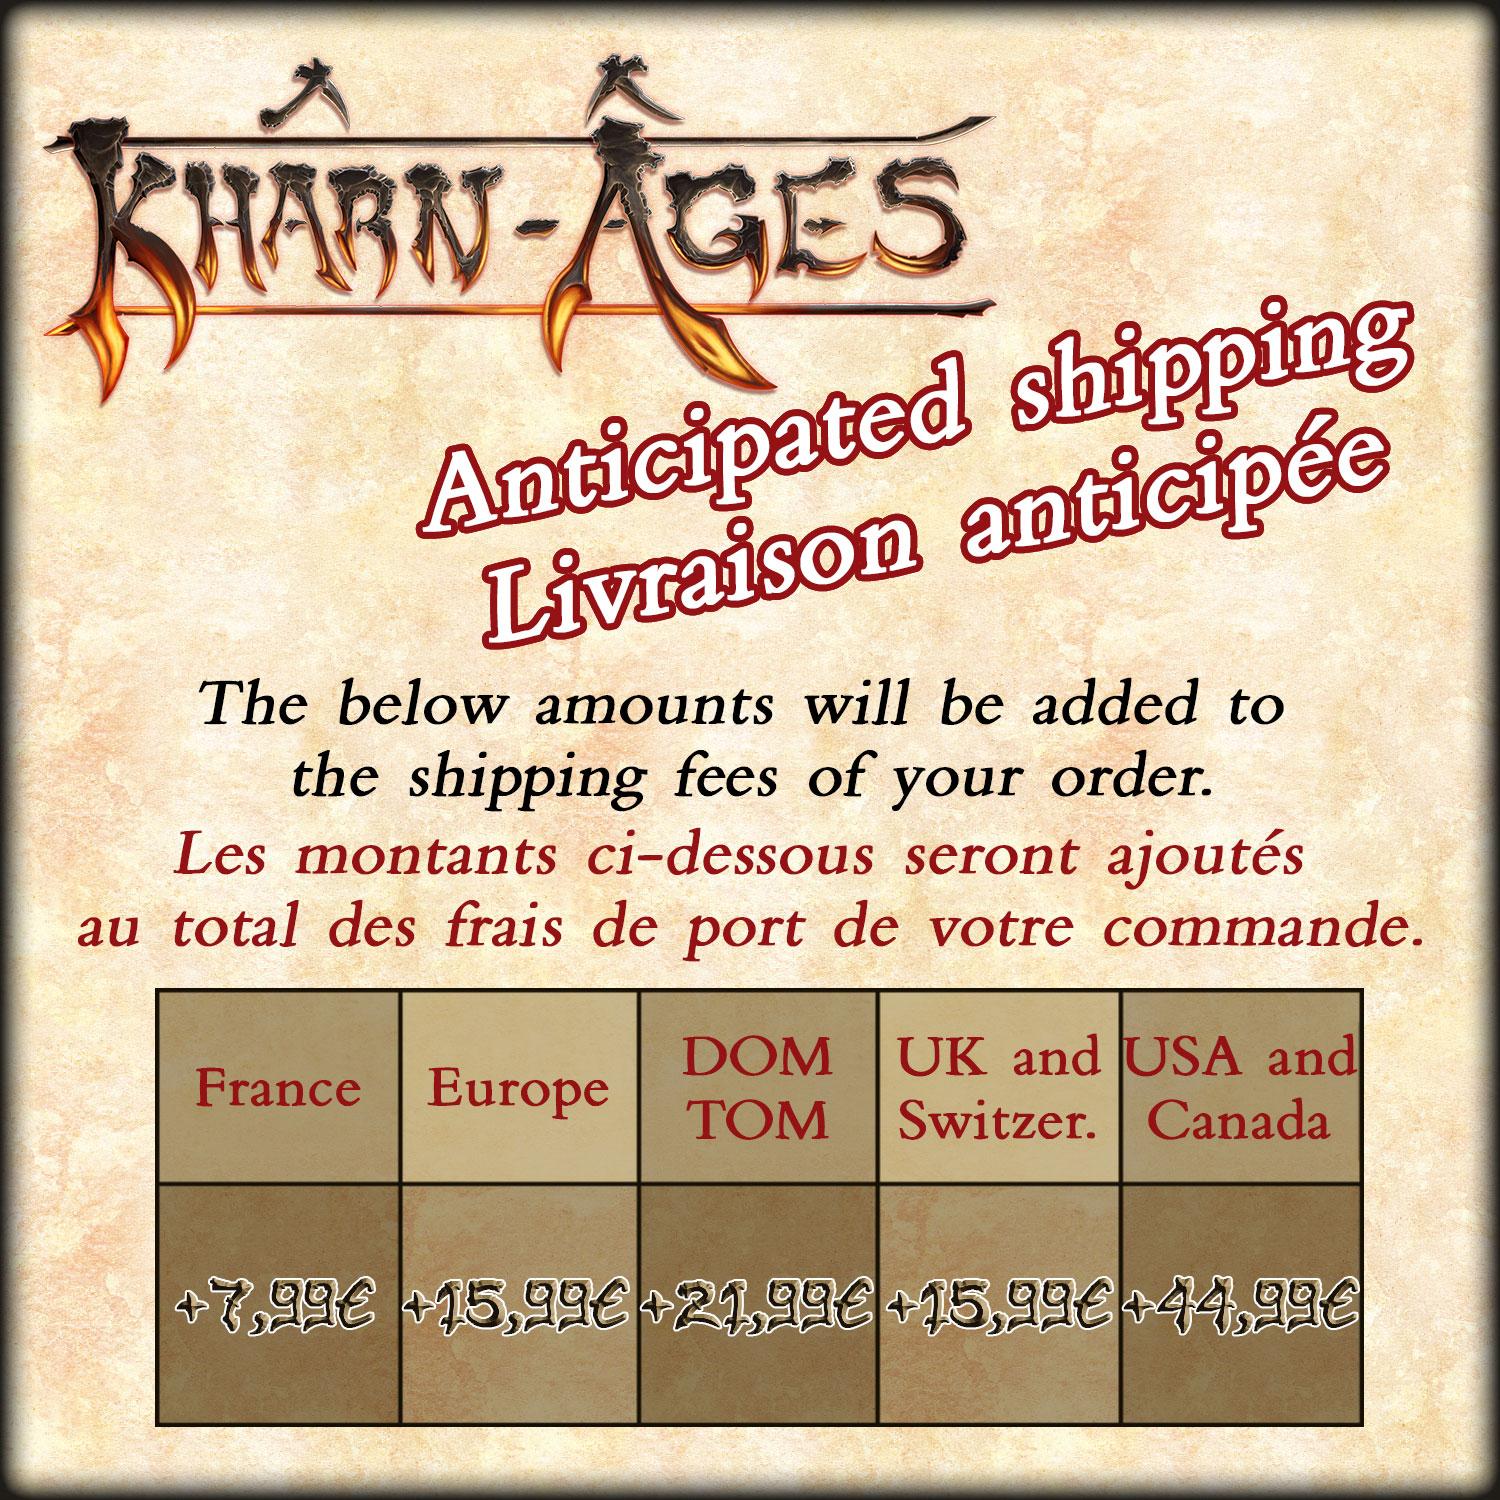 Anticipated shipping montants